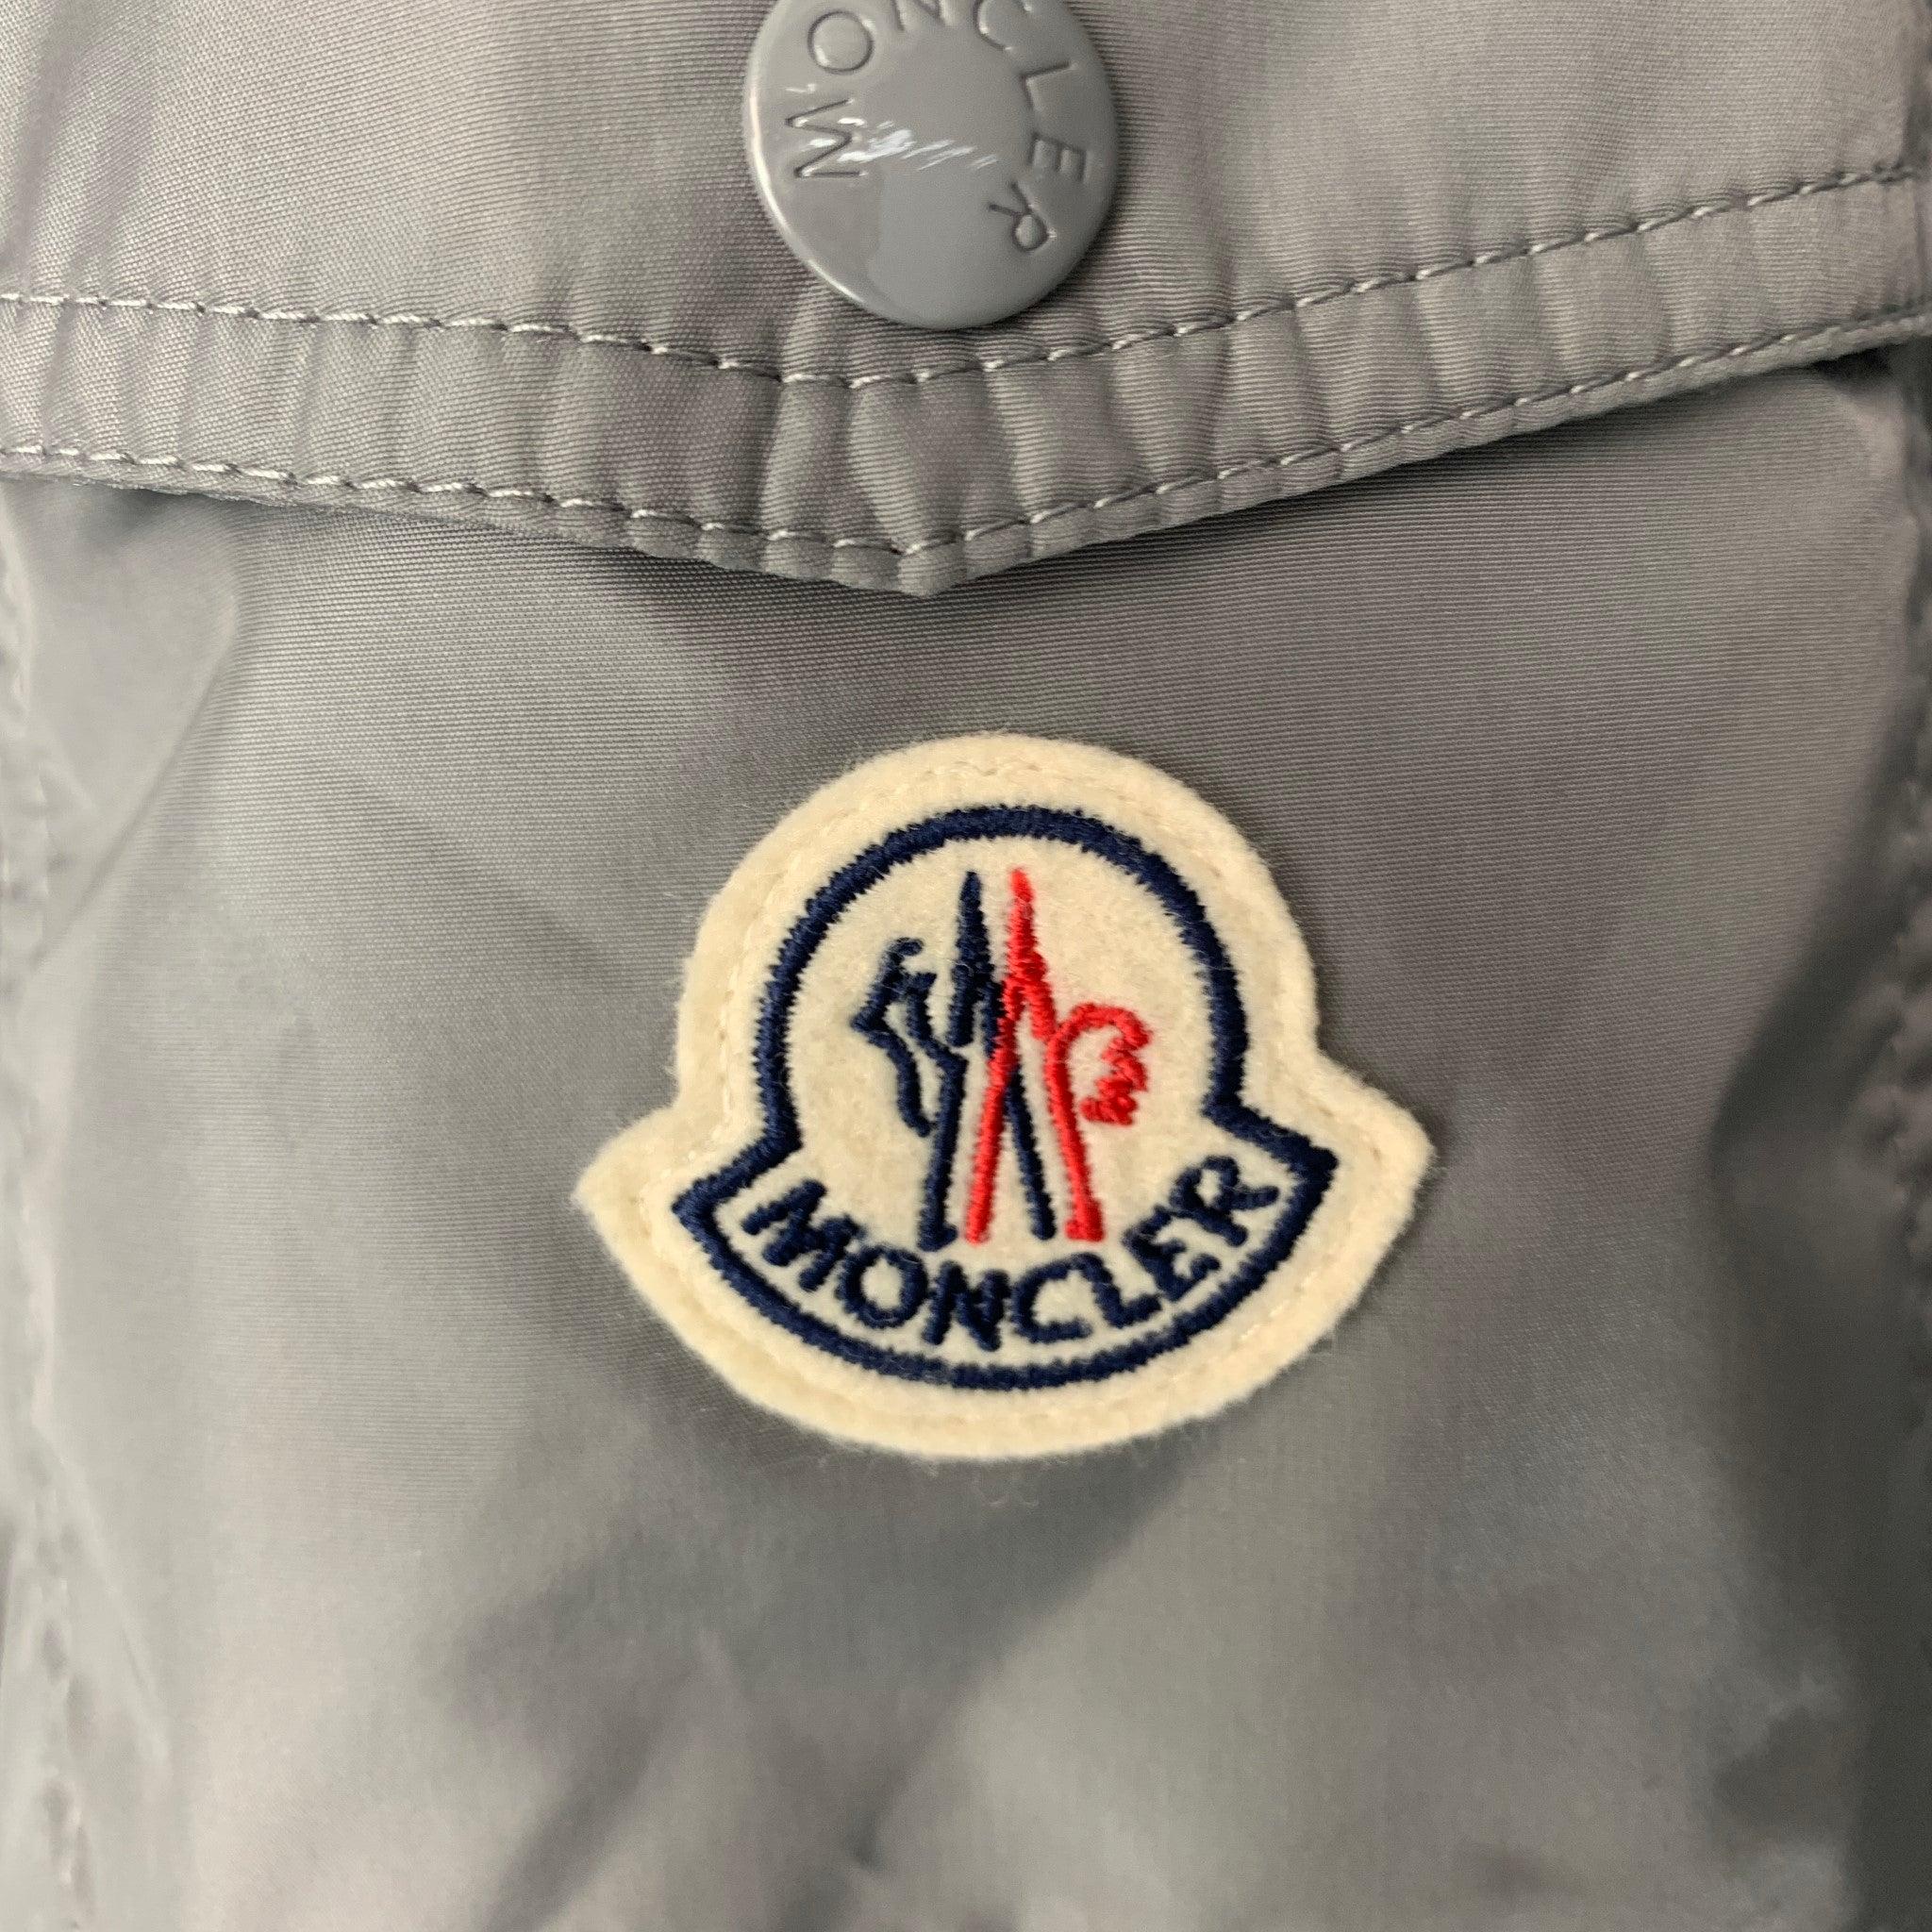 MONCLER windbreaker jacket comes in grey nylon woven material featuring a hidden hood, elastic cuffs, zipper pockets, and zip up closure. Very Good Pre-Owned Condition. Minor signs of wear. 

Marked:   7 

Measurements: 
 
Shoulder: 20.5 inches